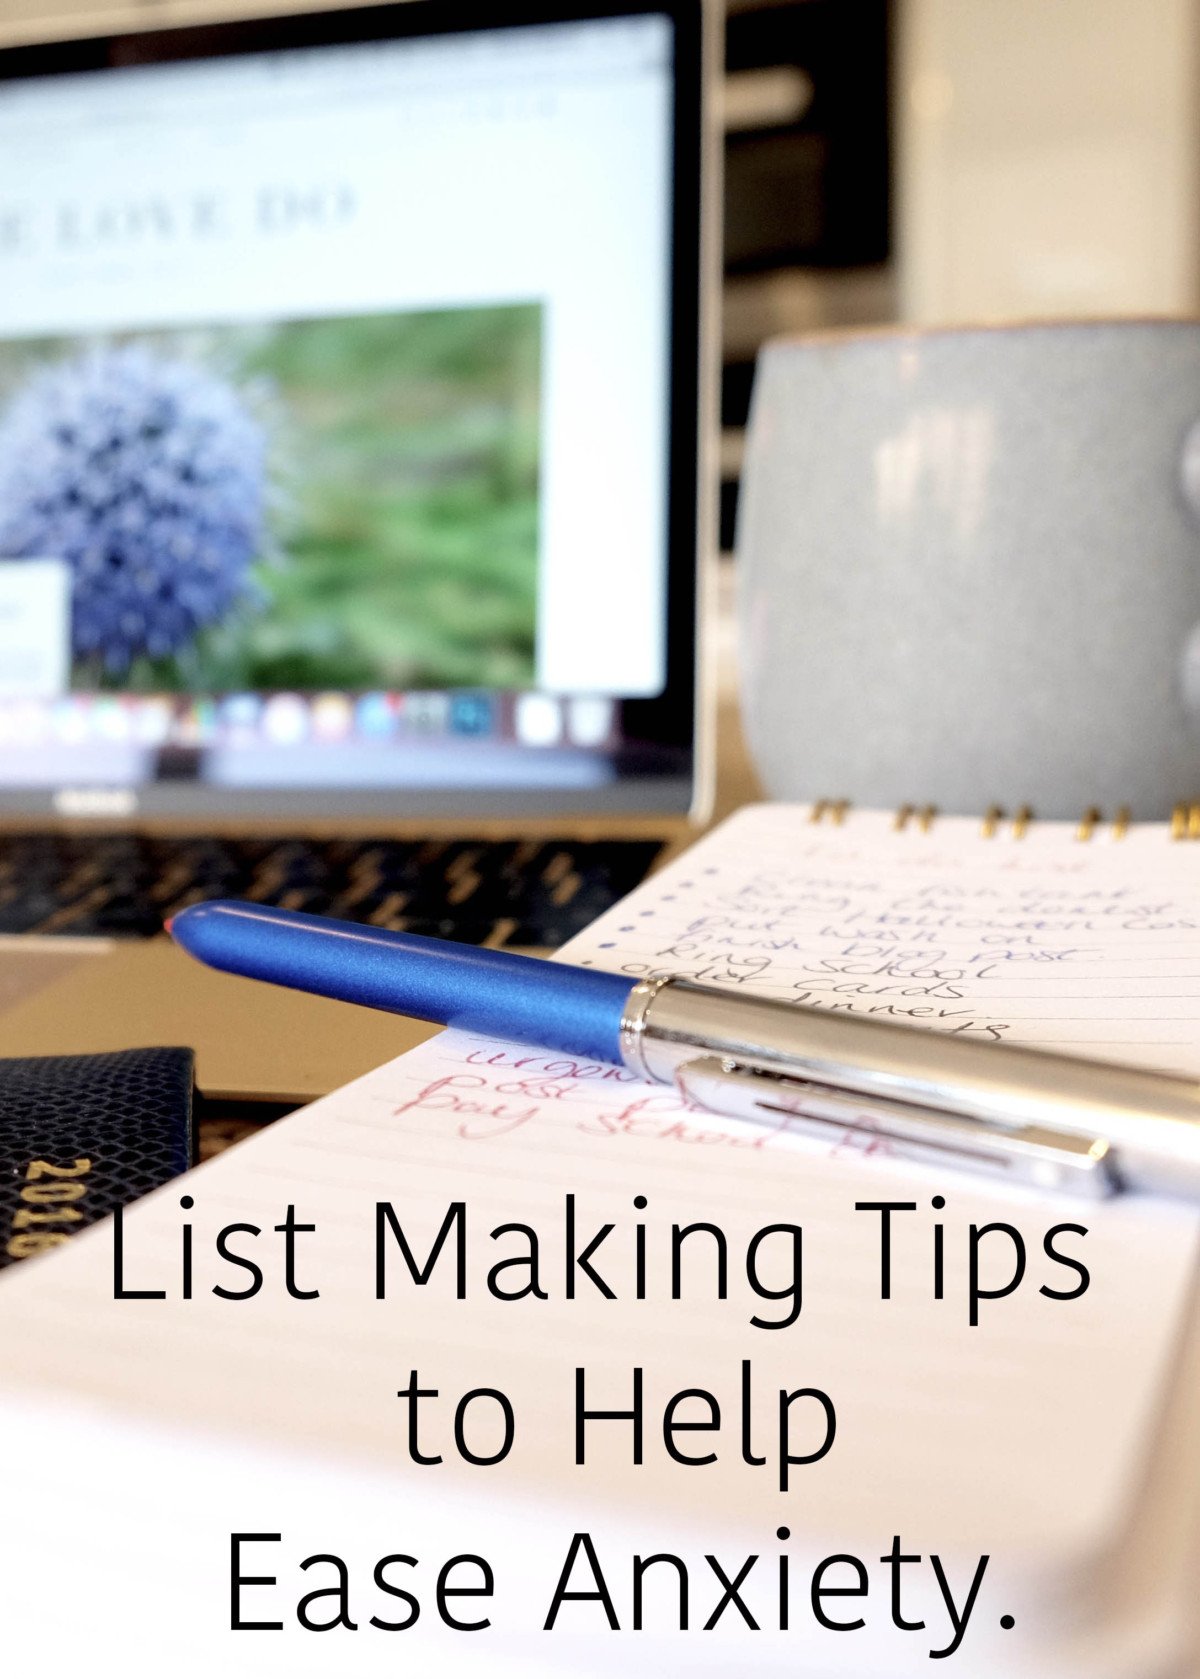 List Making Tips to Help Ease Anxiety.